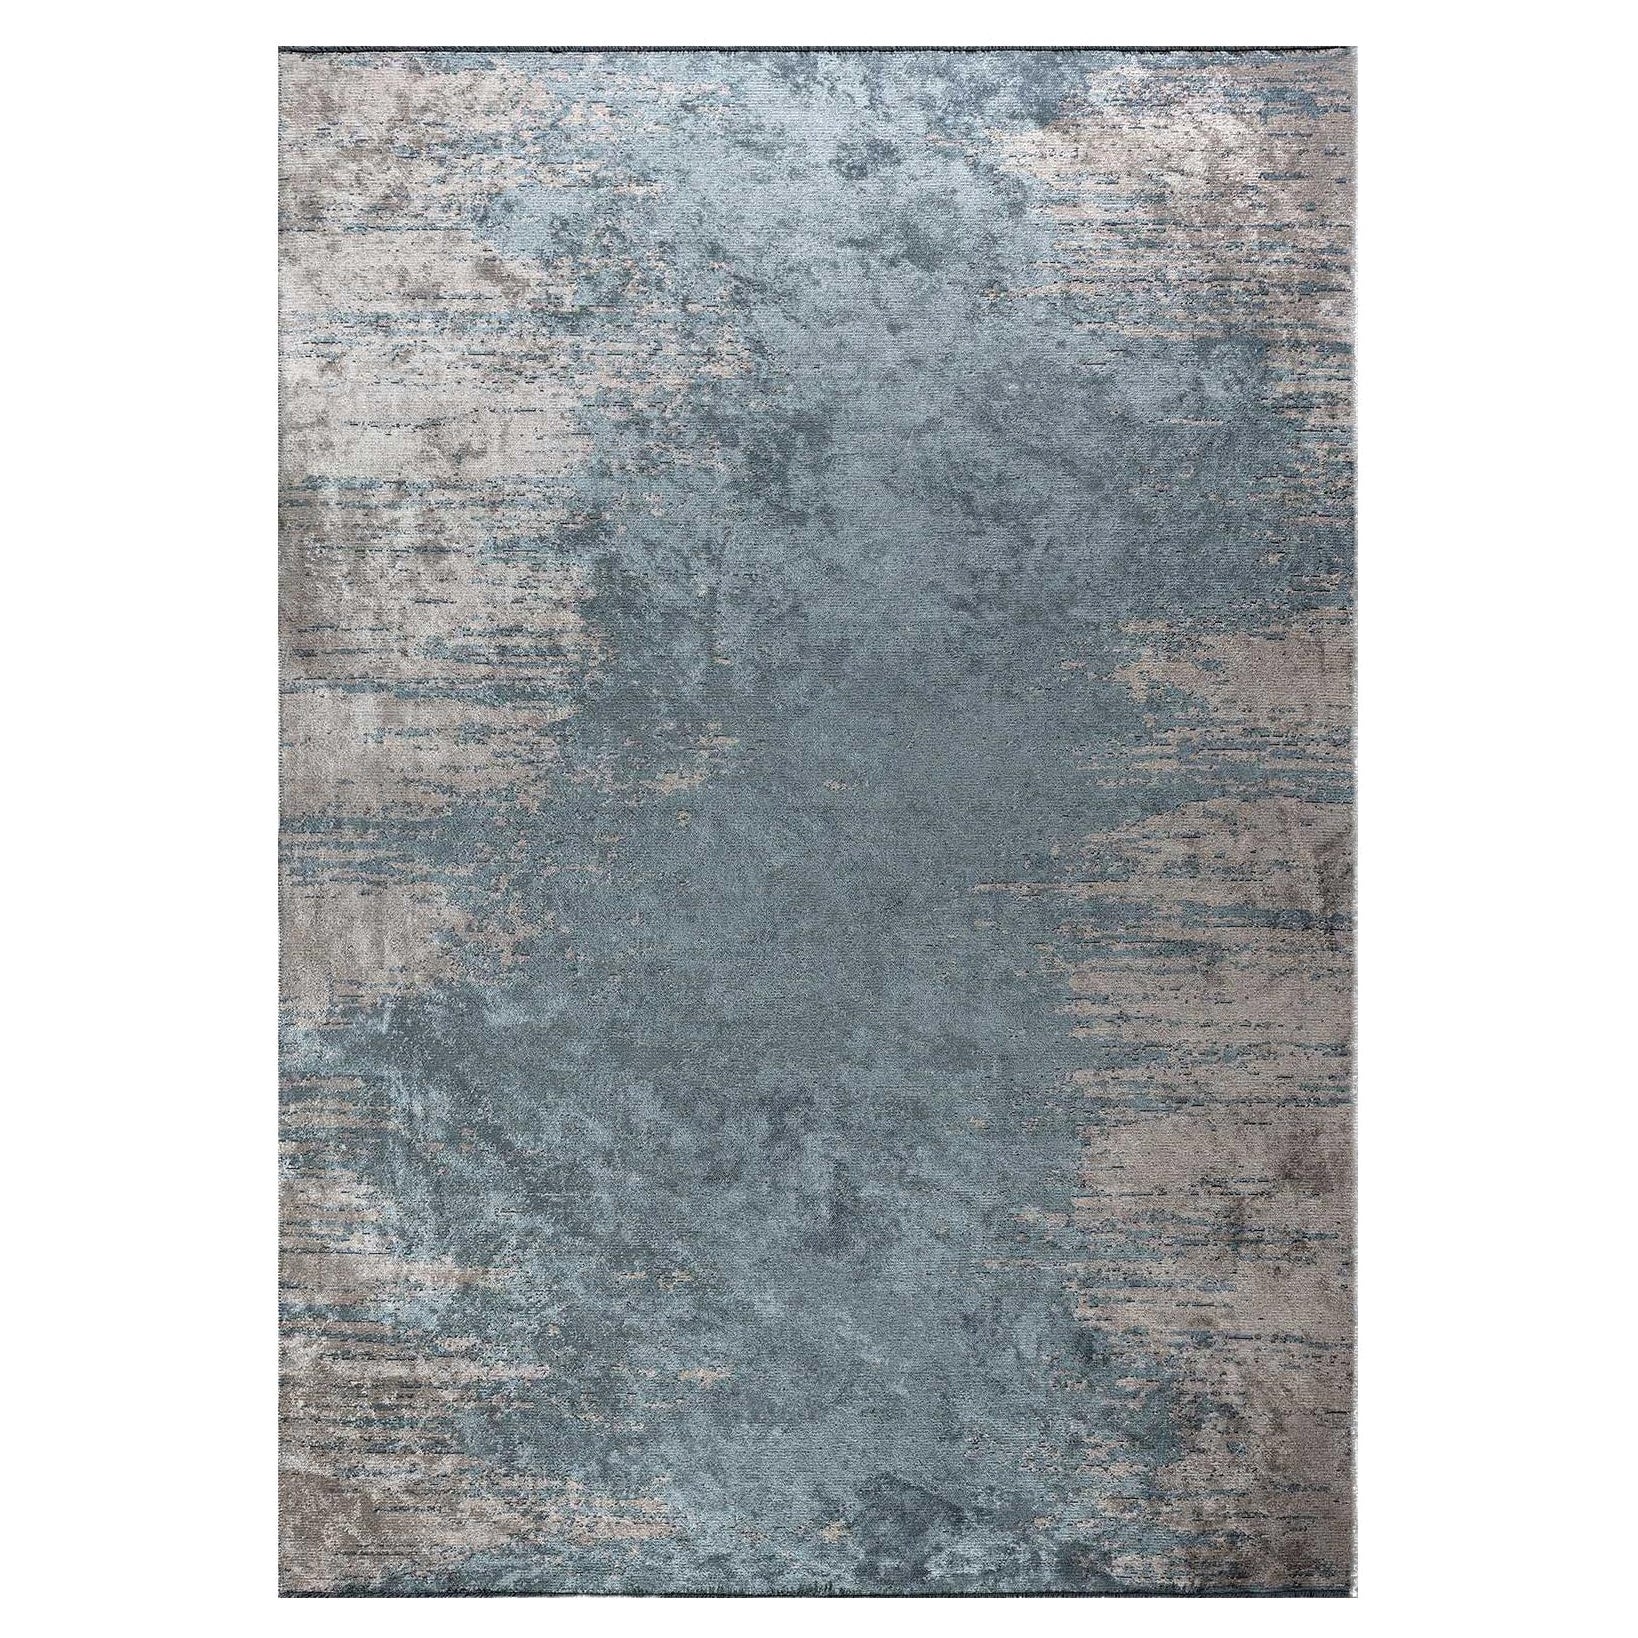 Modern Light Blue Silver Abstract Chenille Rug Without Fringe Ready to Ship For Sale